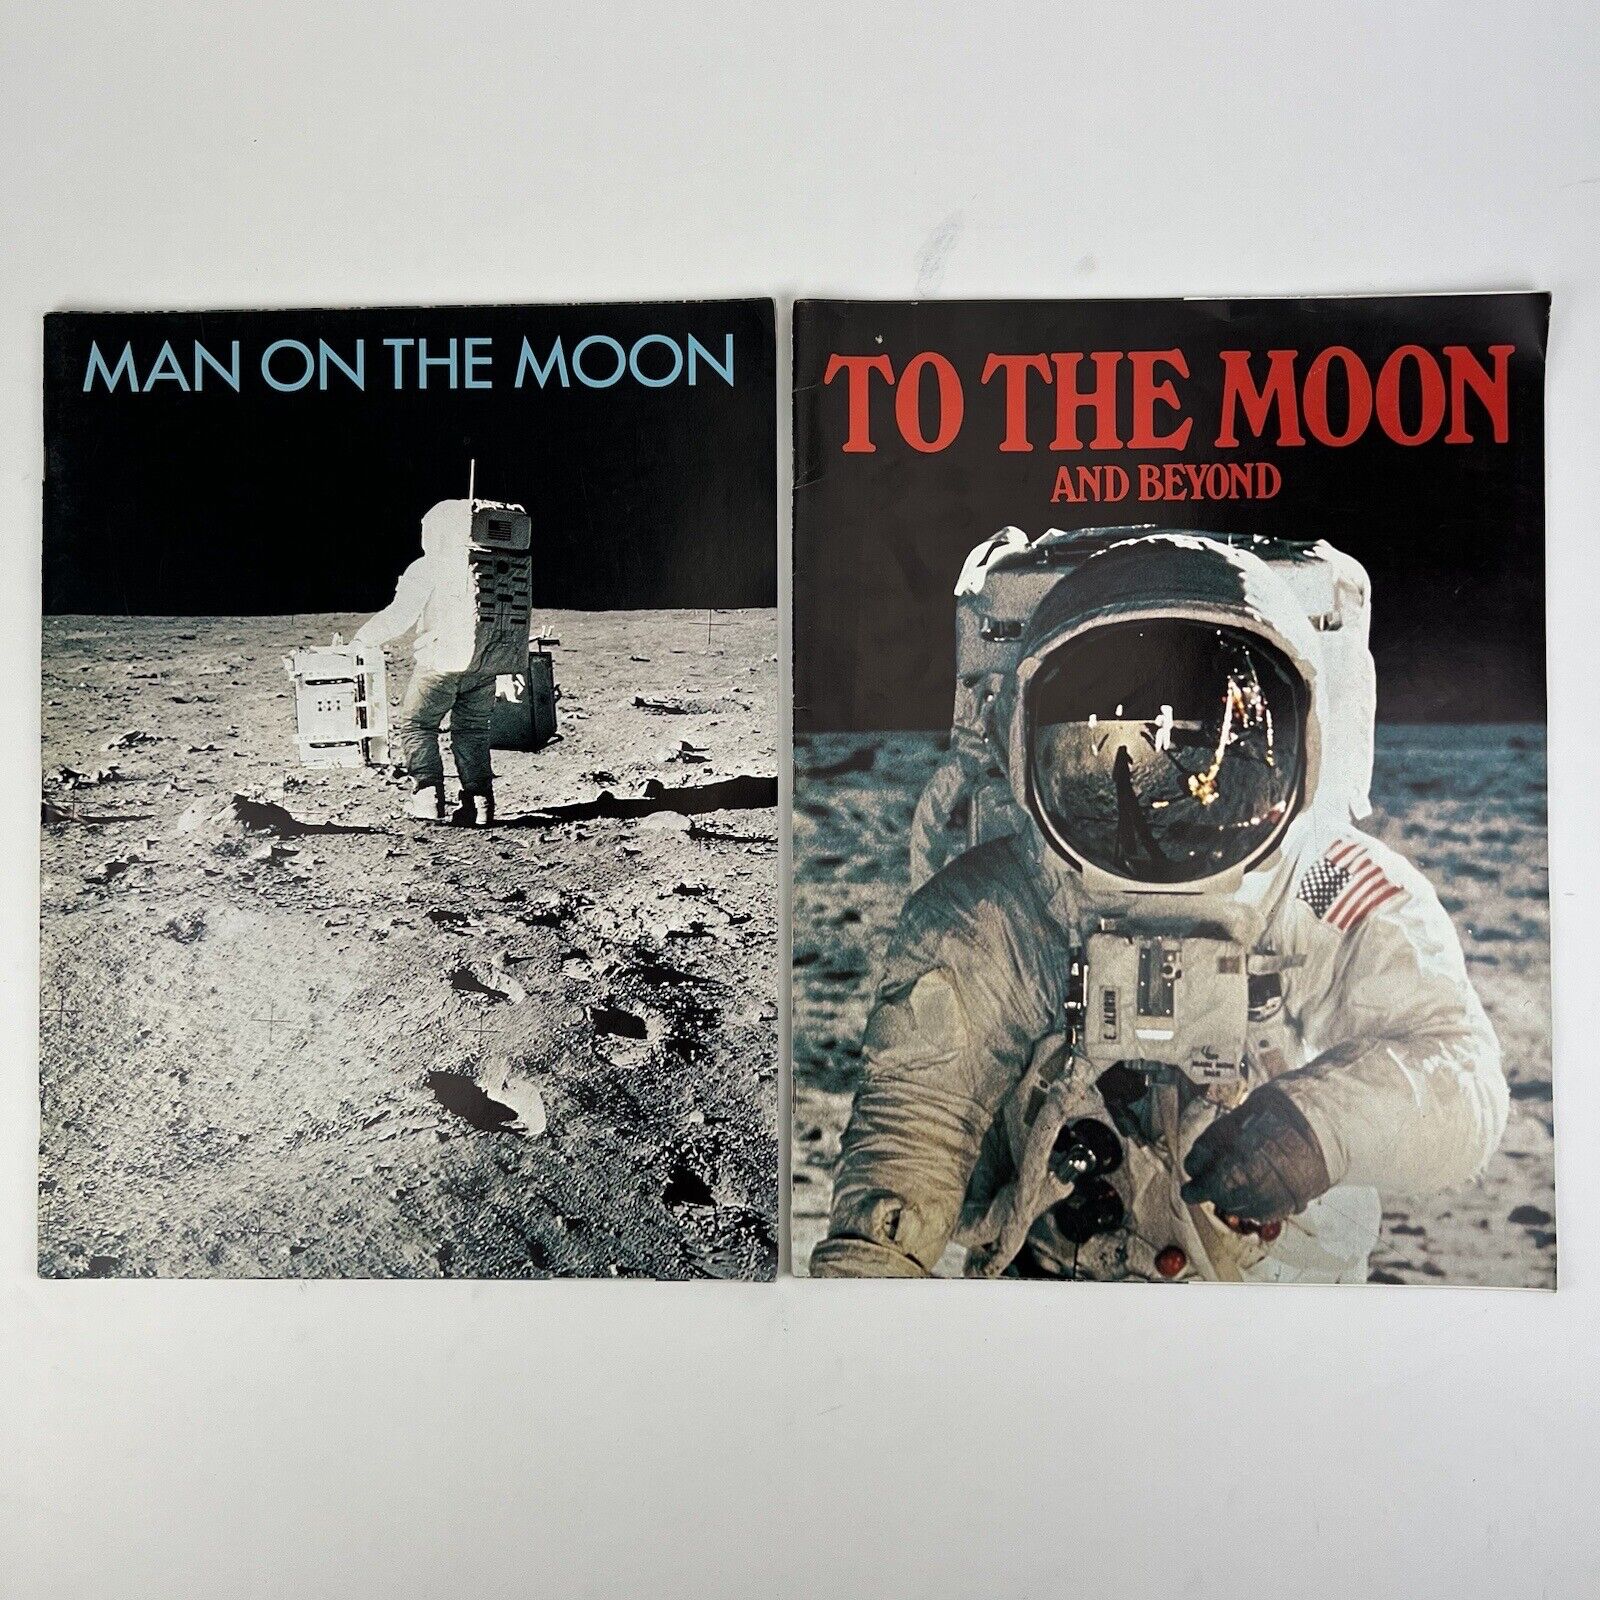 Lot of 2x RARE 1969 APOLLO LUNAR MOON MISSION Books by U.S. Information Service